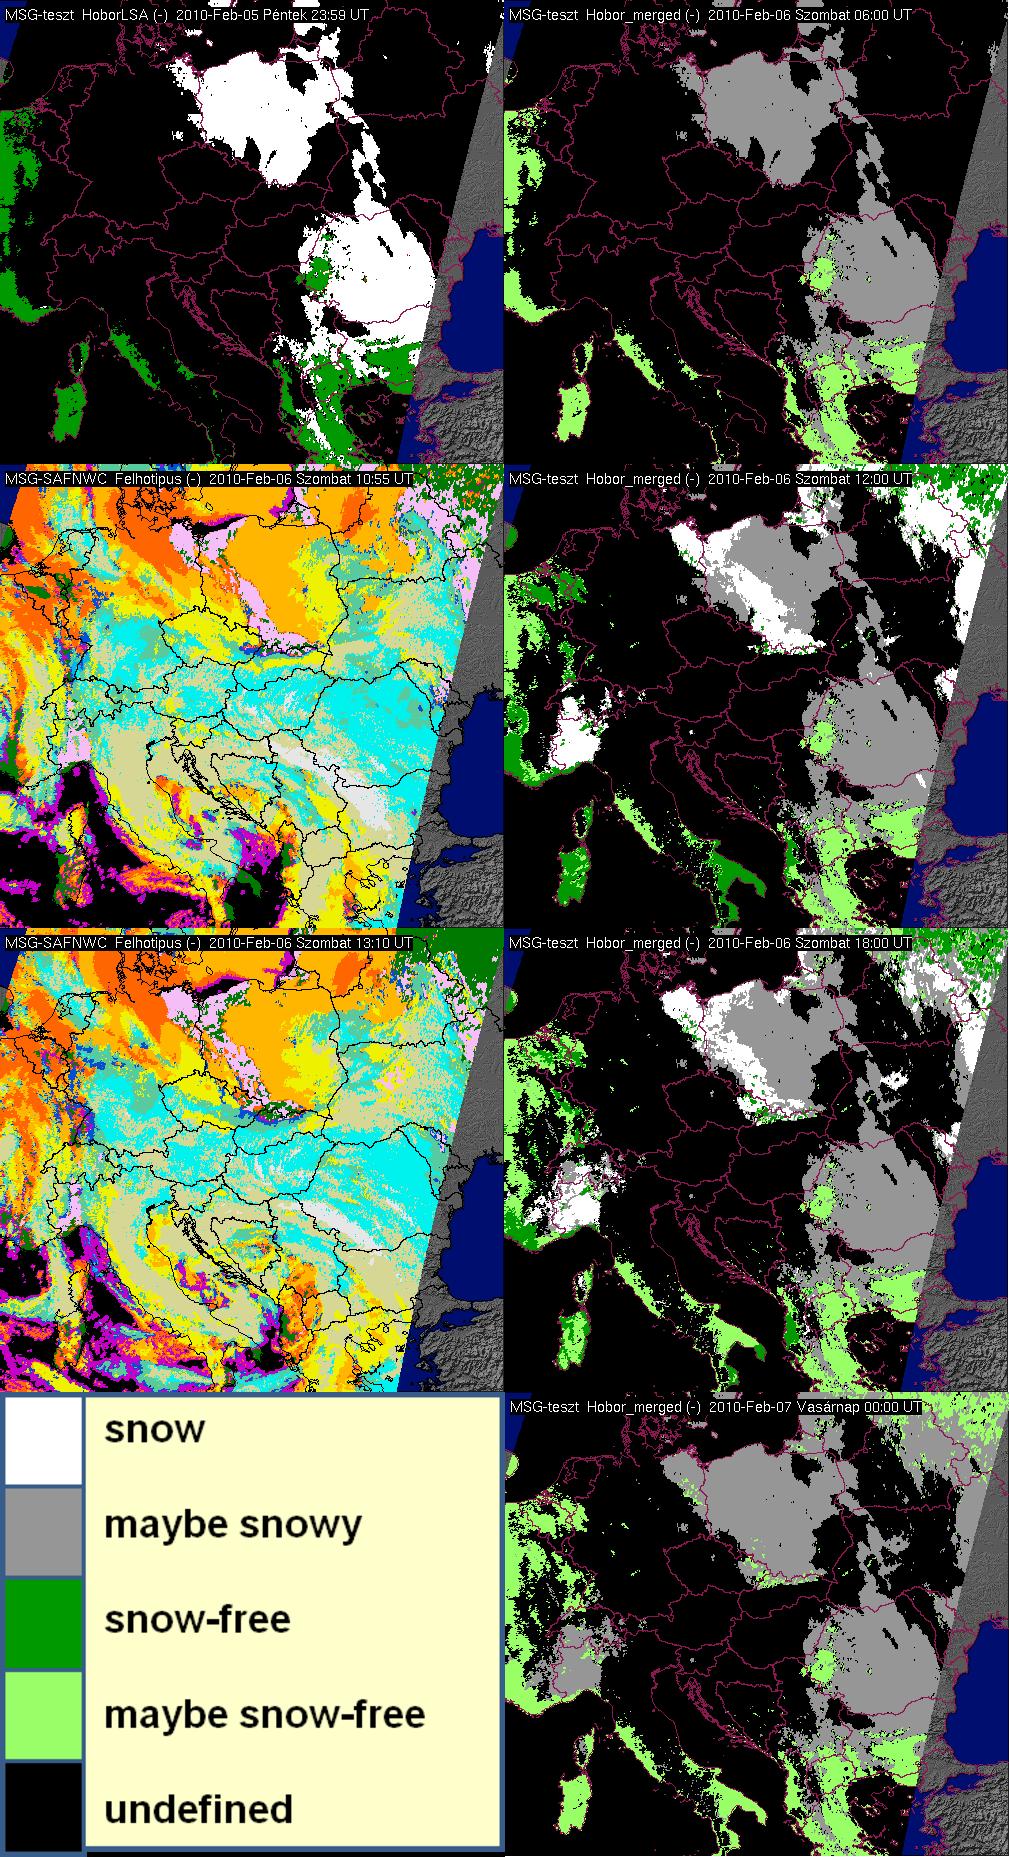 Figure 4: Merged snow cover maps of 07 February 2010 for 06, 12, 18 and 24 UTC are presented in the right panels of the 1 st, 2 nd, 3 rd and 4 th rows, respectively.